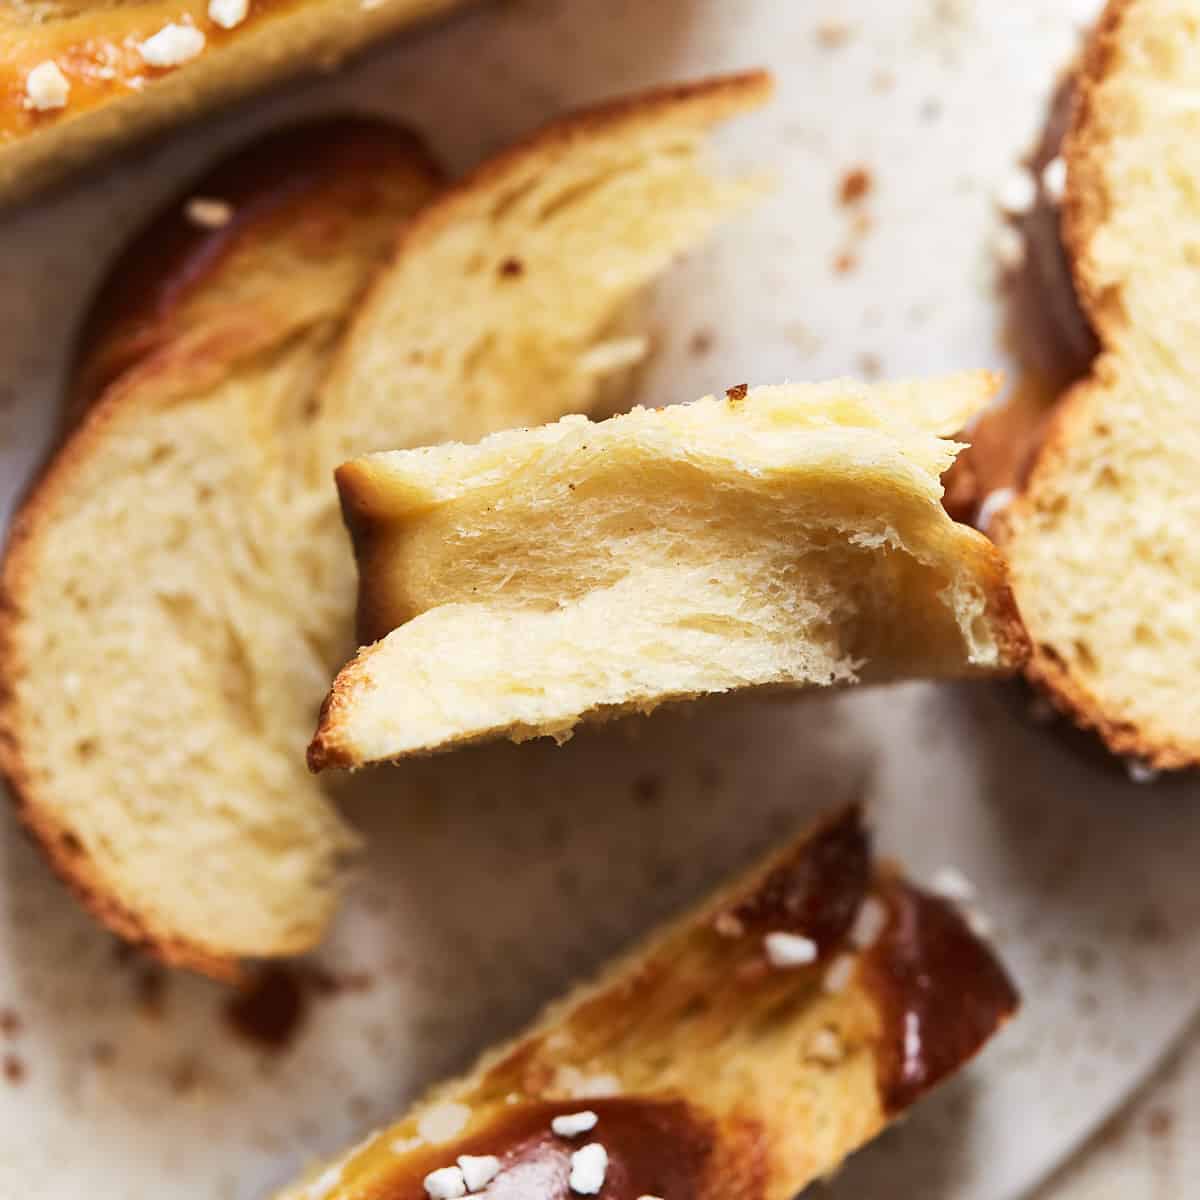 Torn slice of challah bread on a serving plate